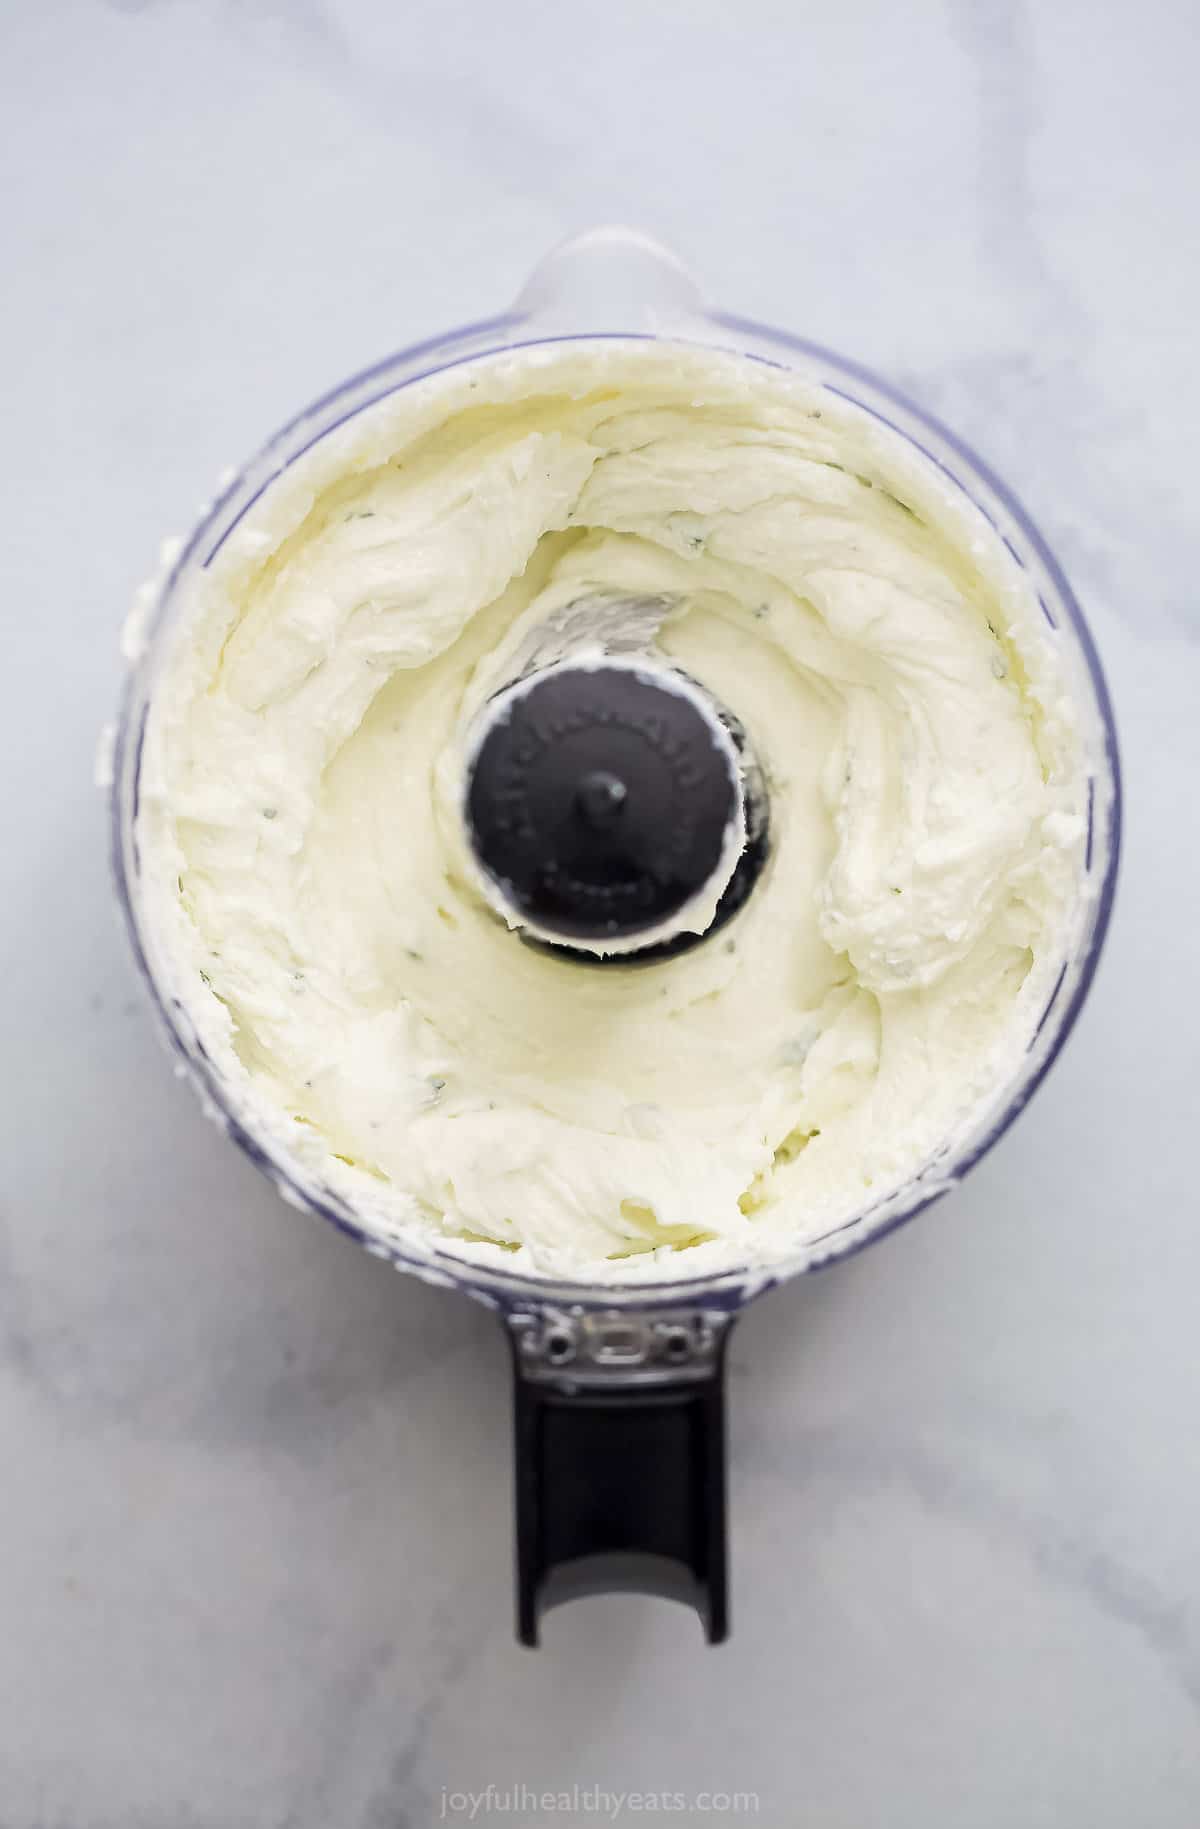 Creamy cheese mixture in the food processor.